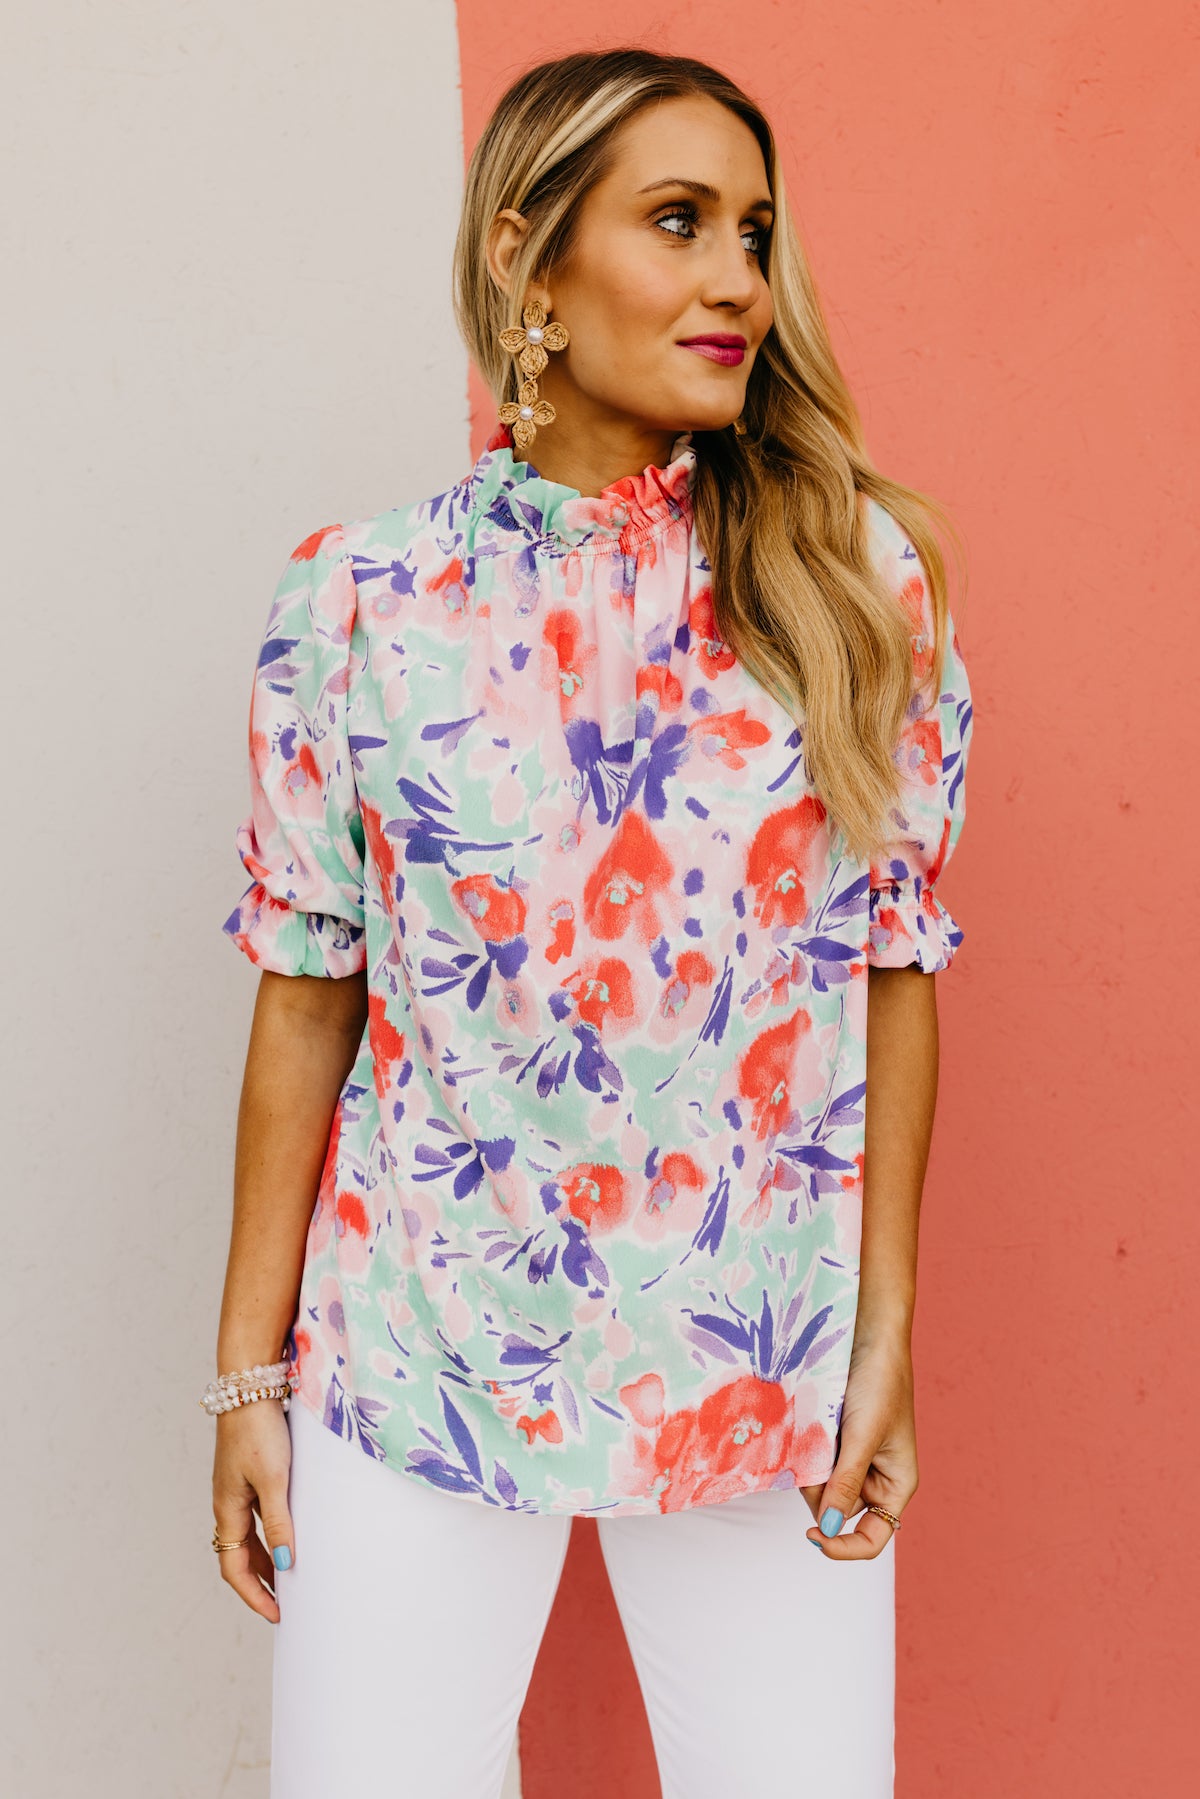 The Hanes Watercolor Floral Blouse